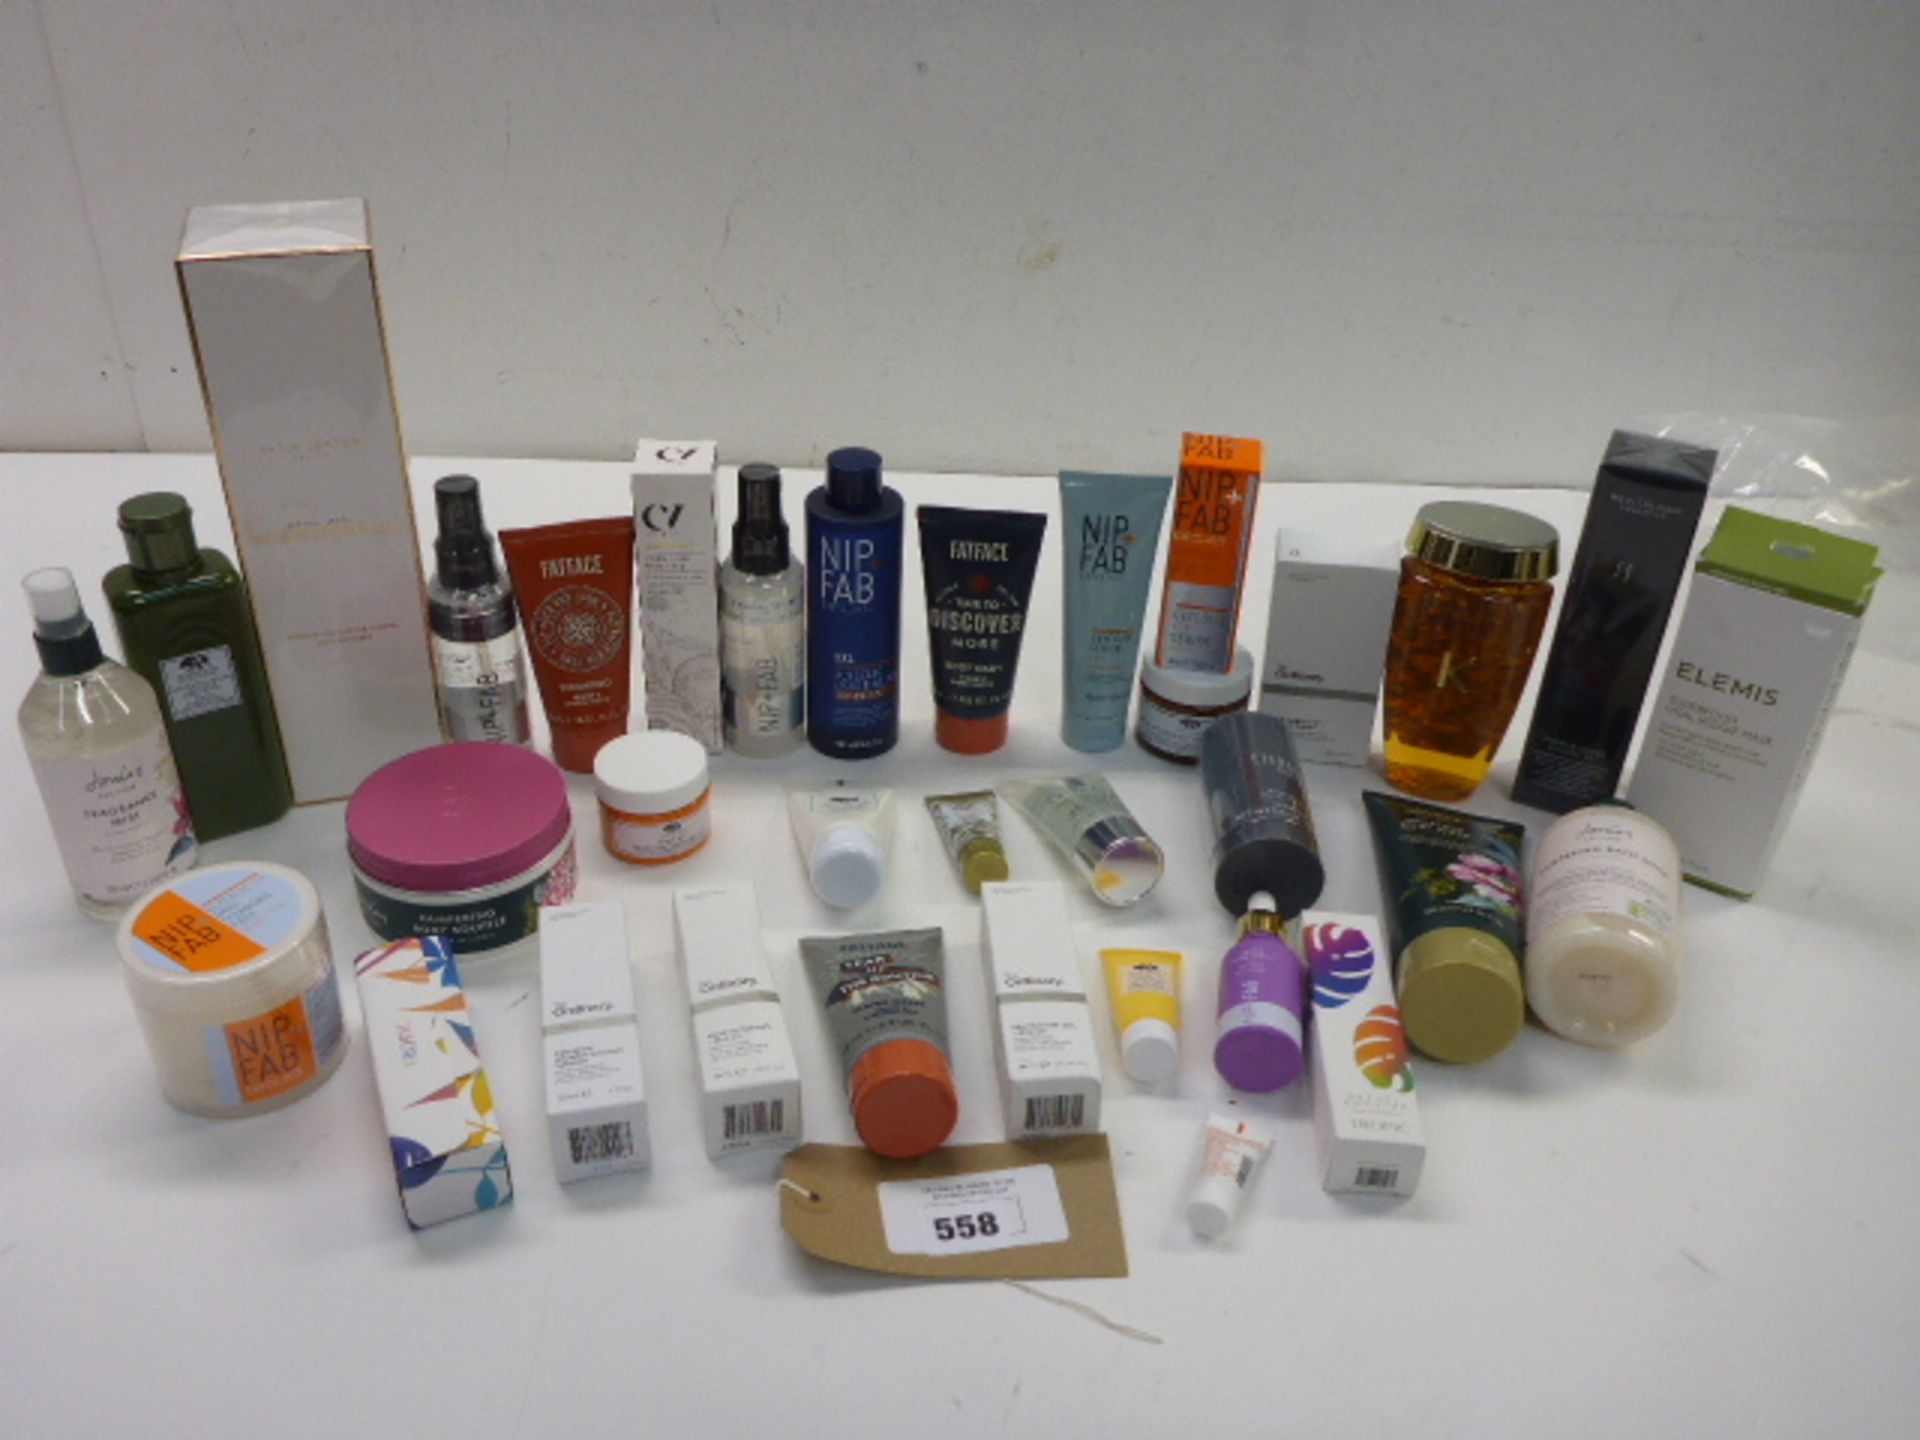 Selection of branded toiletries including Clinique, Elemis, Nip Fab, Joules, Katie Loxton, Tropic